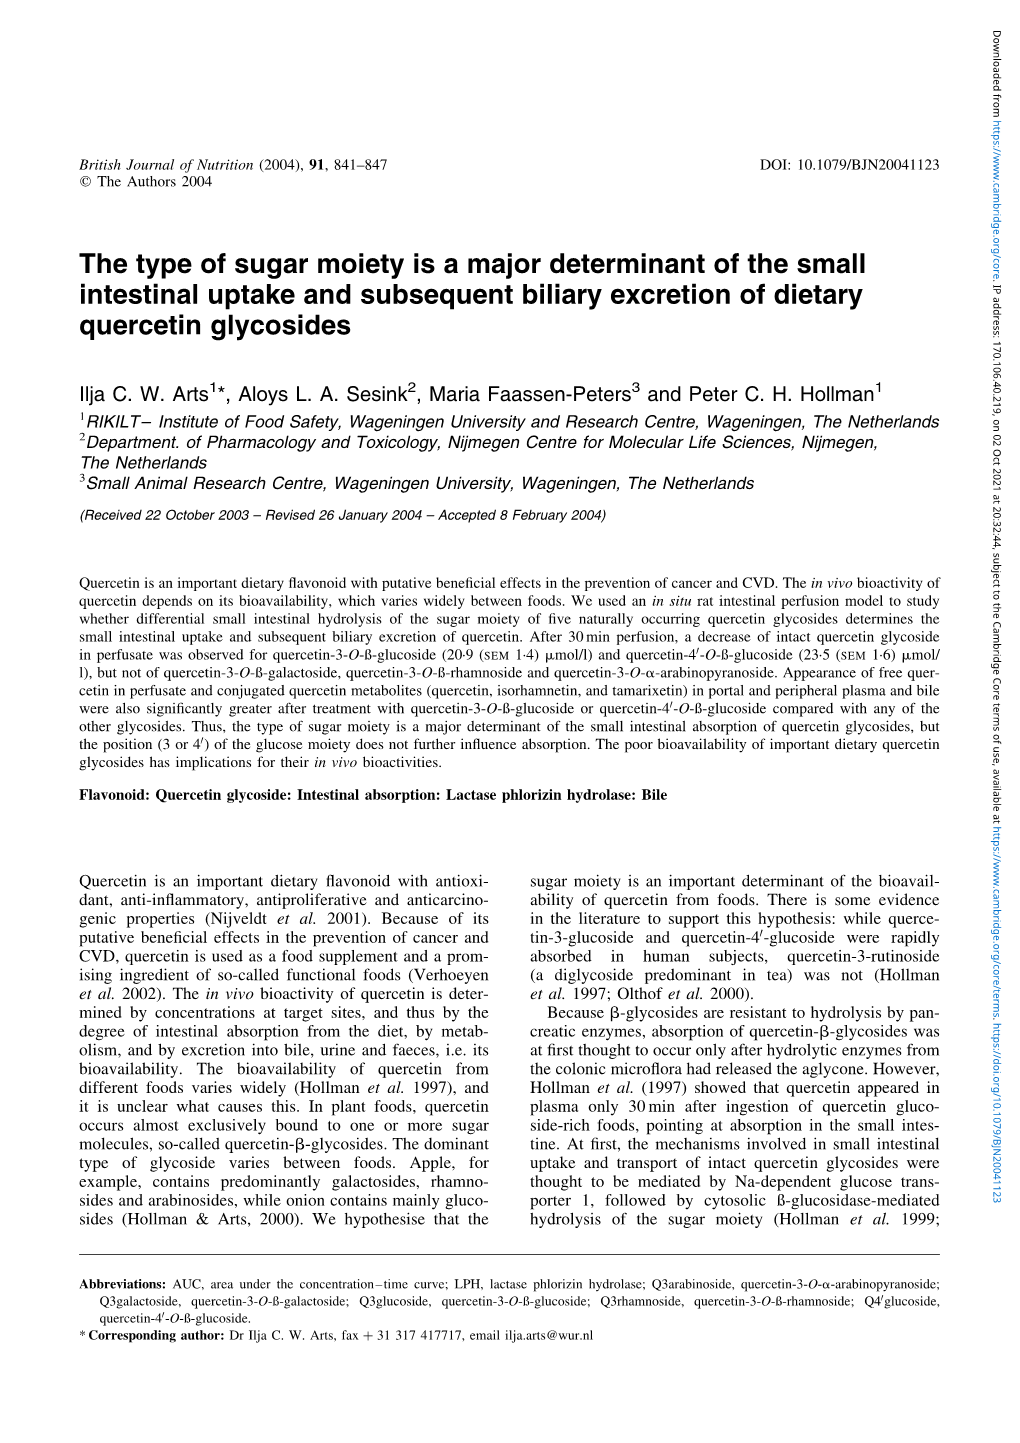 The Type of Sugar Moiety Is a Major Determinant of the Small Intestinal